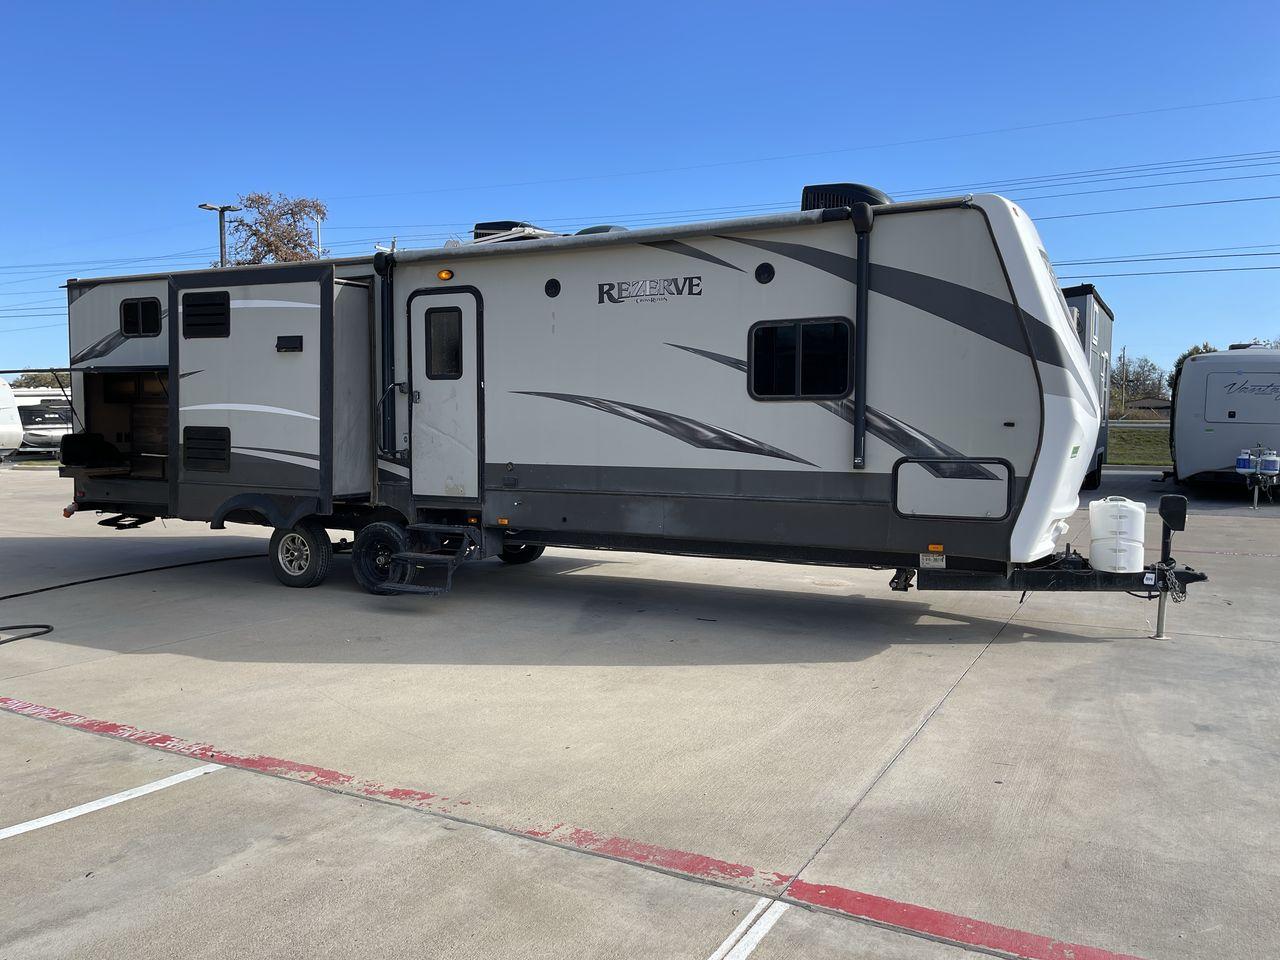 2017 WHITE VOLANTE RTZ33BH (4V0TC3327HB) , Length: 36.58 ft. | Dry Weight: 8,864 lbs. | Gross Weight: 10,250 lbs. | Slides: 3 transmission, located at 4319 N Main St, Cleburne, TX, 76033, (817) 678-5133, 32.385960, -97.391212 - The 2017 VOLANTE RTZ33BH offers a spacious interior with a layout that is perfect for families or large groups. Its length of 33 feet offers ample room for your adventures. Inside, you'll find a comfortable sleeping space with a bunkhouse layout, making it suitable for family trips. The bunkhouse la - Photo #23